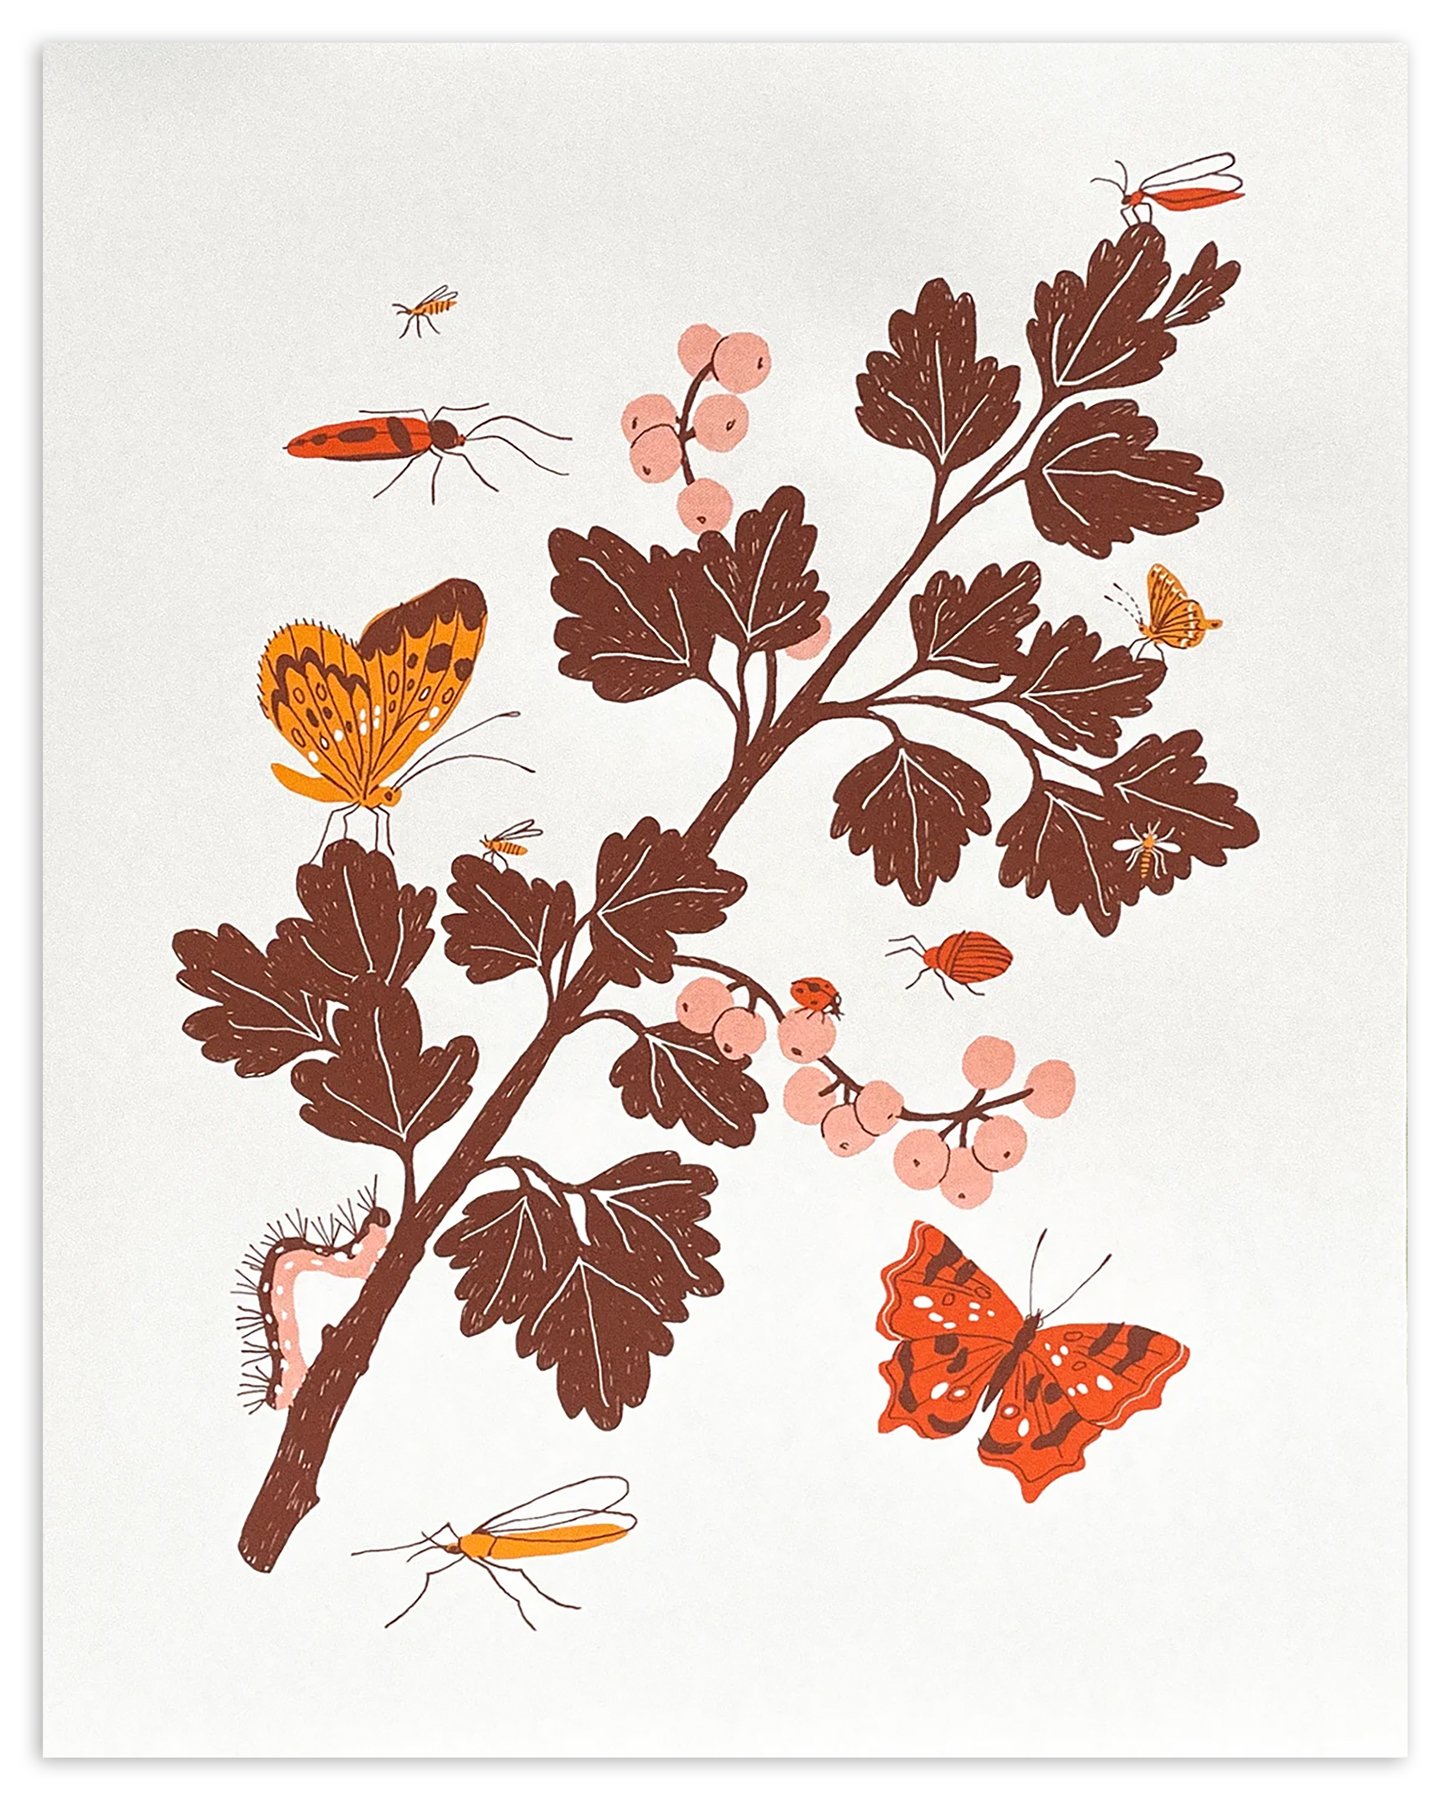 Image of Ribes Screen Print by Liana Jegers